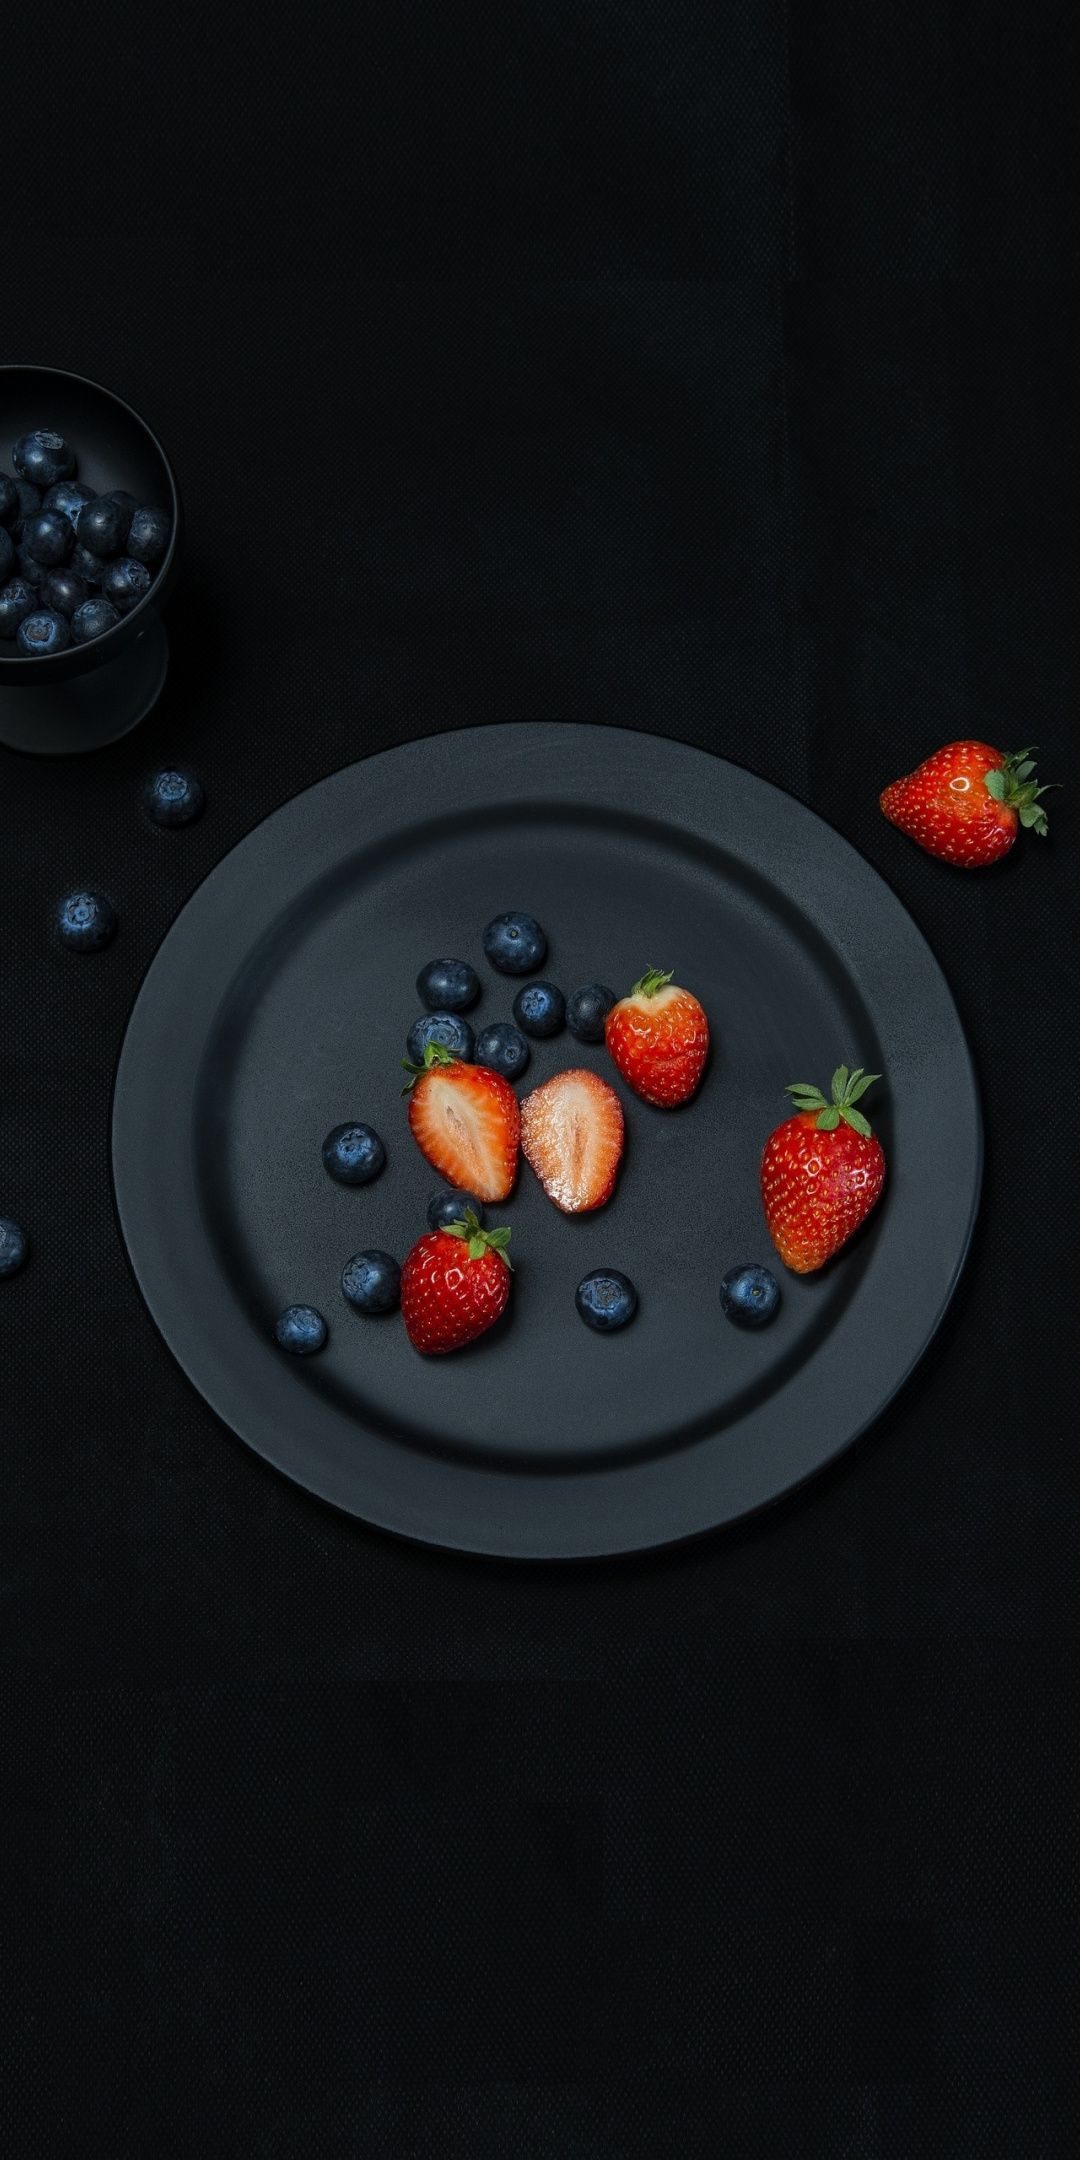 1080x2160 Fruits dish, strawberry, blueberry Wallpaper | Fruit dishes, Food, Food wallpaper